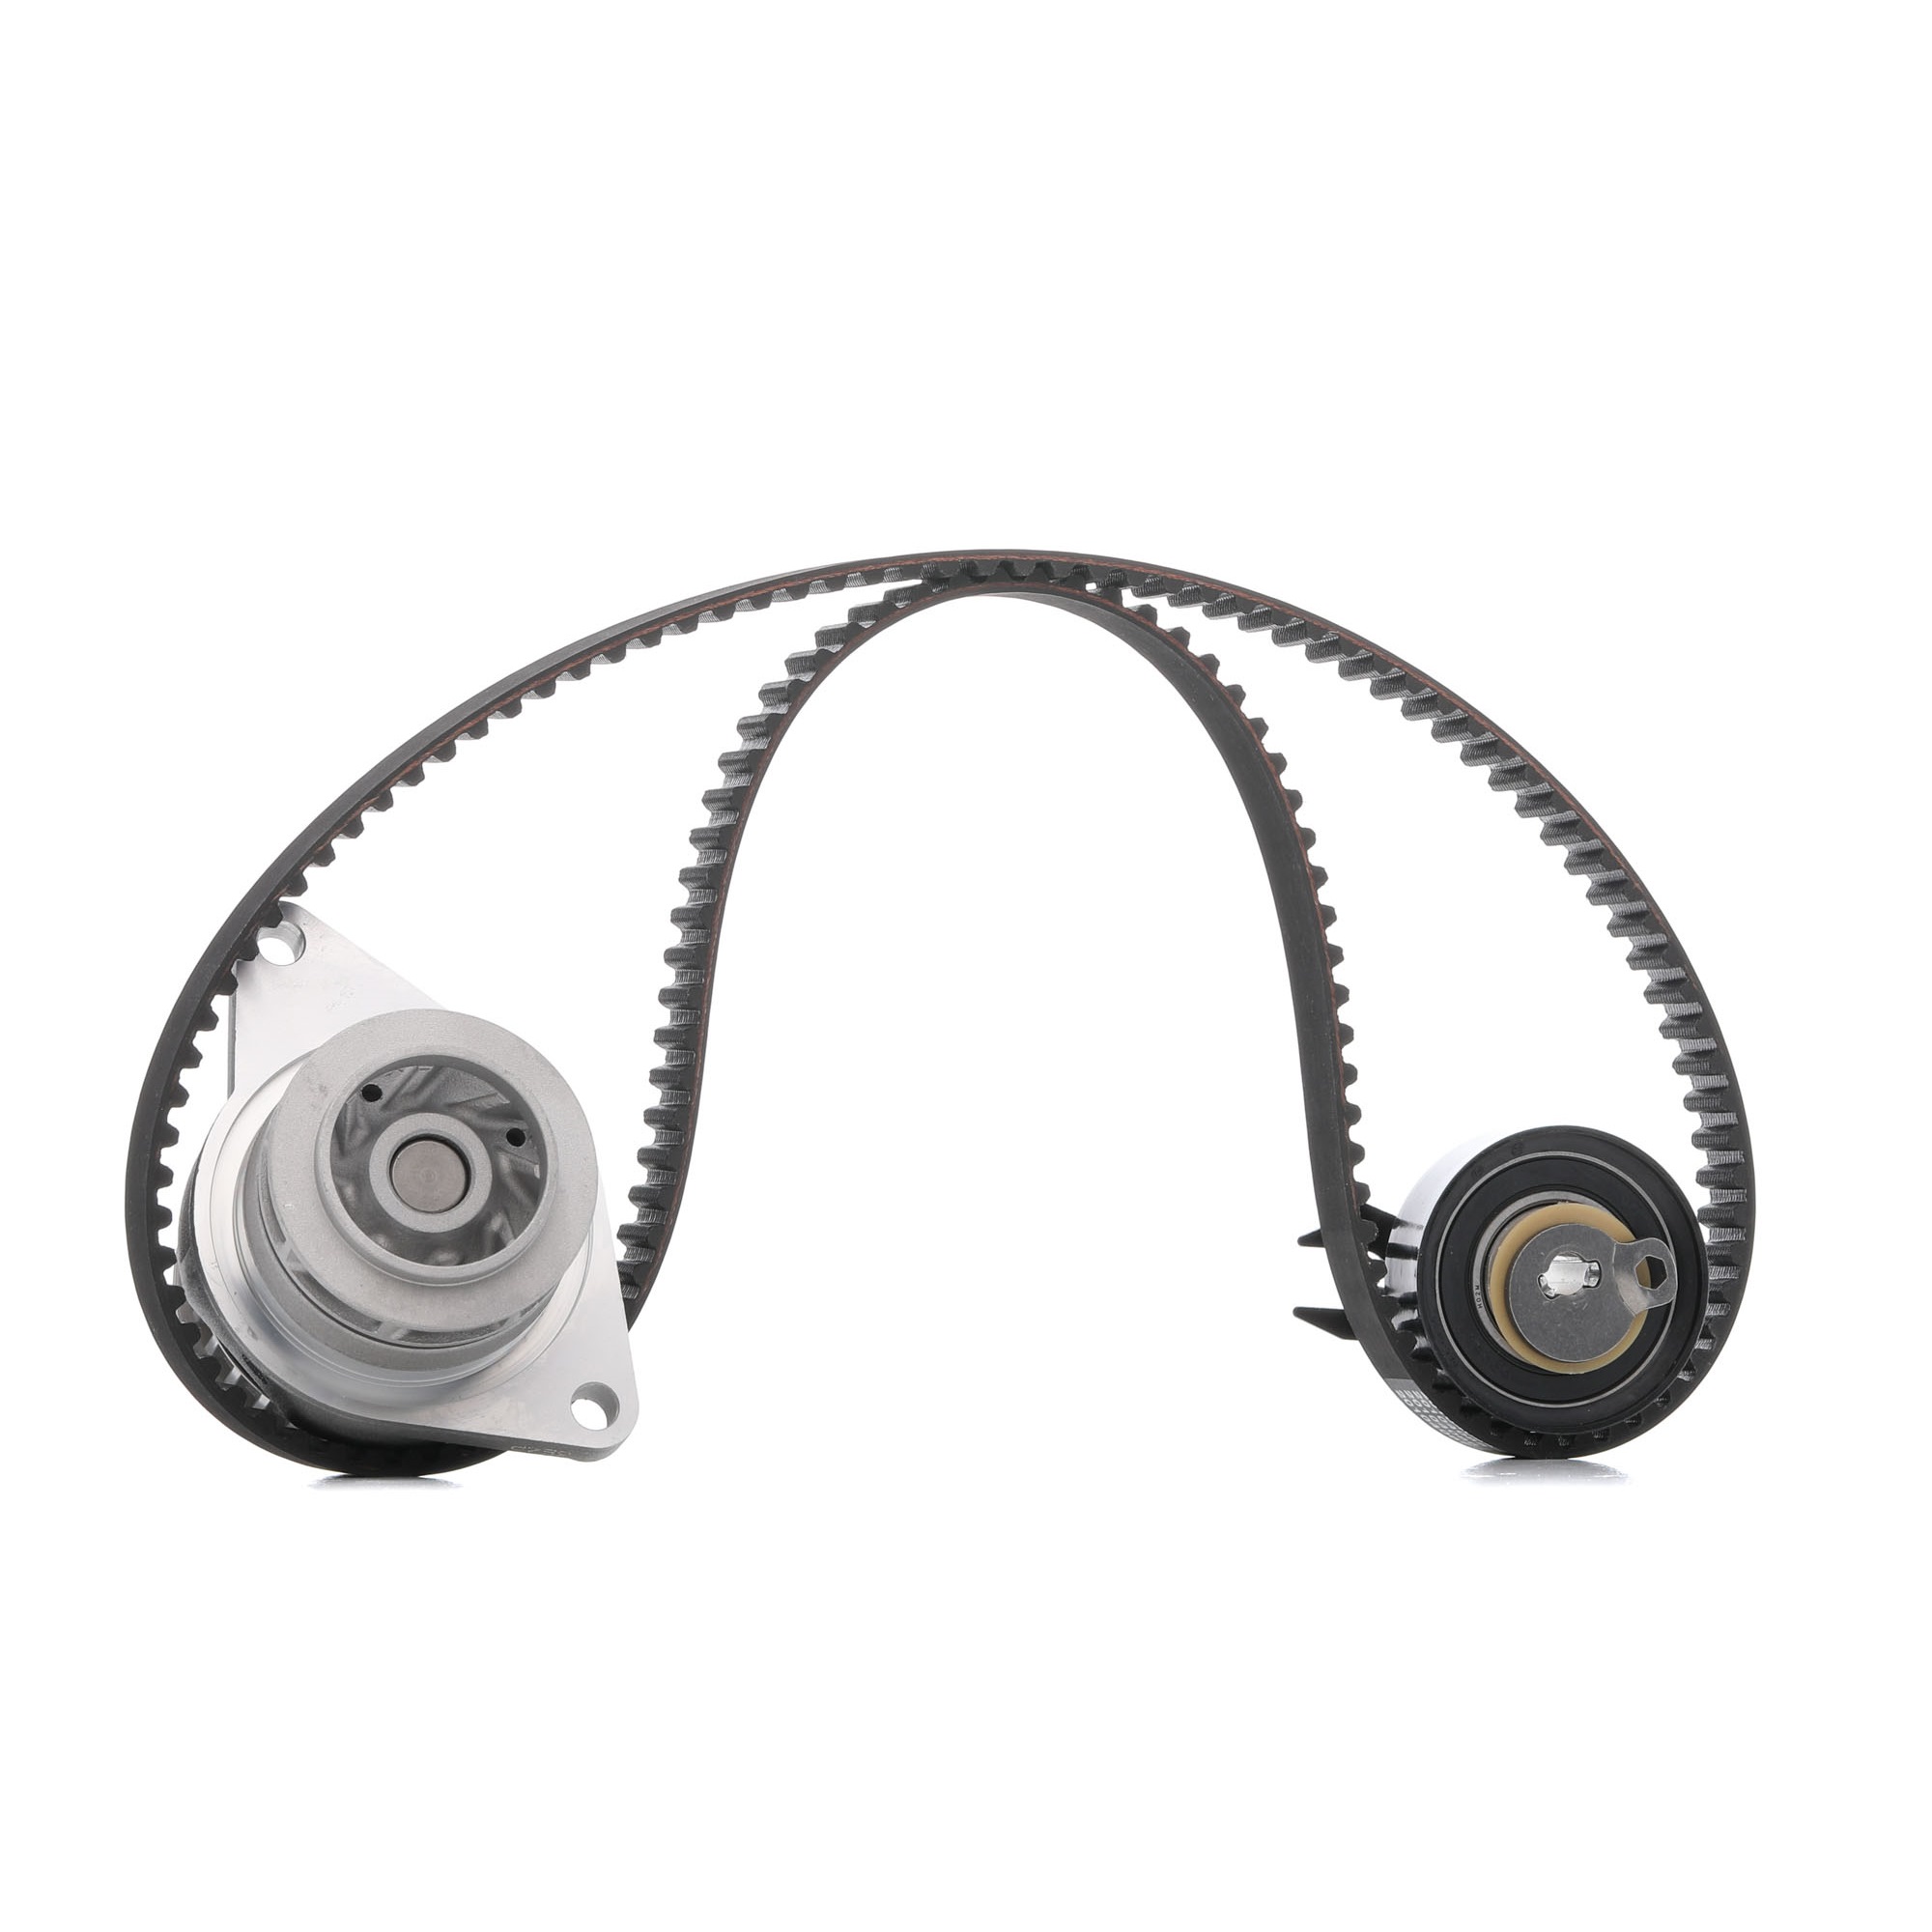 MAGNETI MARELLI 132011160024 Water pump and timing belt kit Number of Teeth: 135 L: 1080 mm, Width: 19 mm